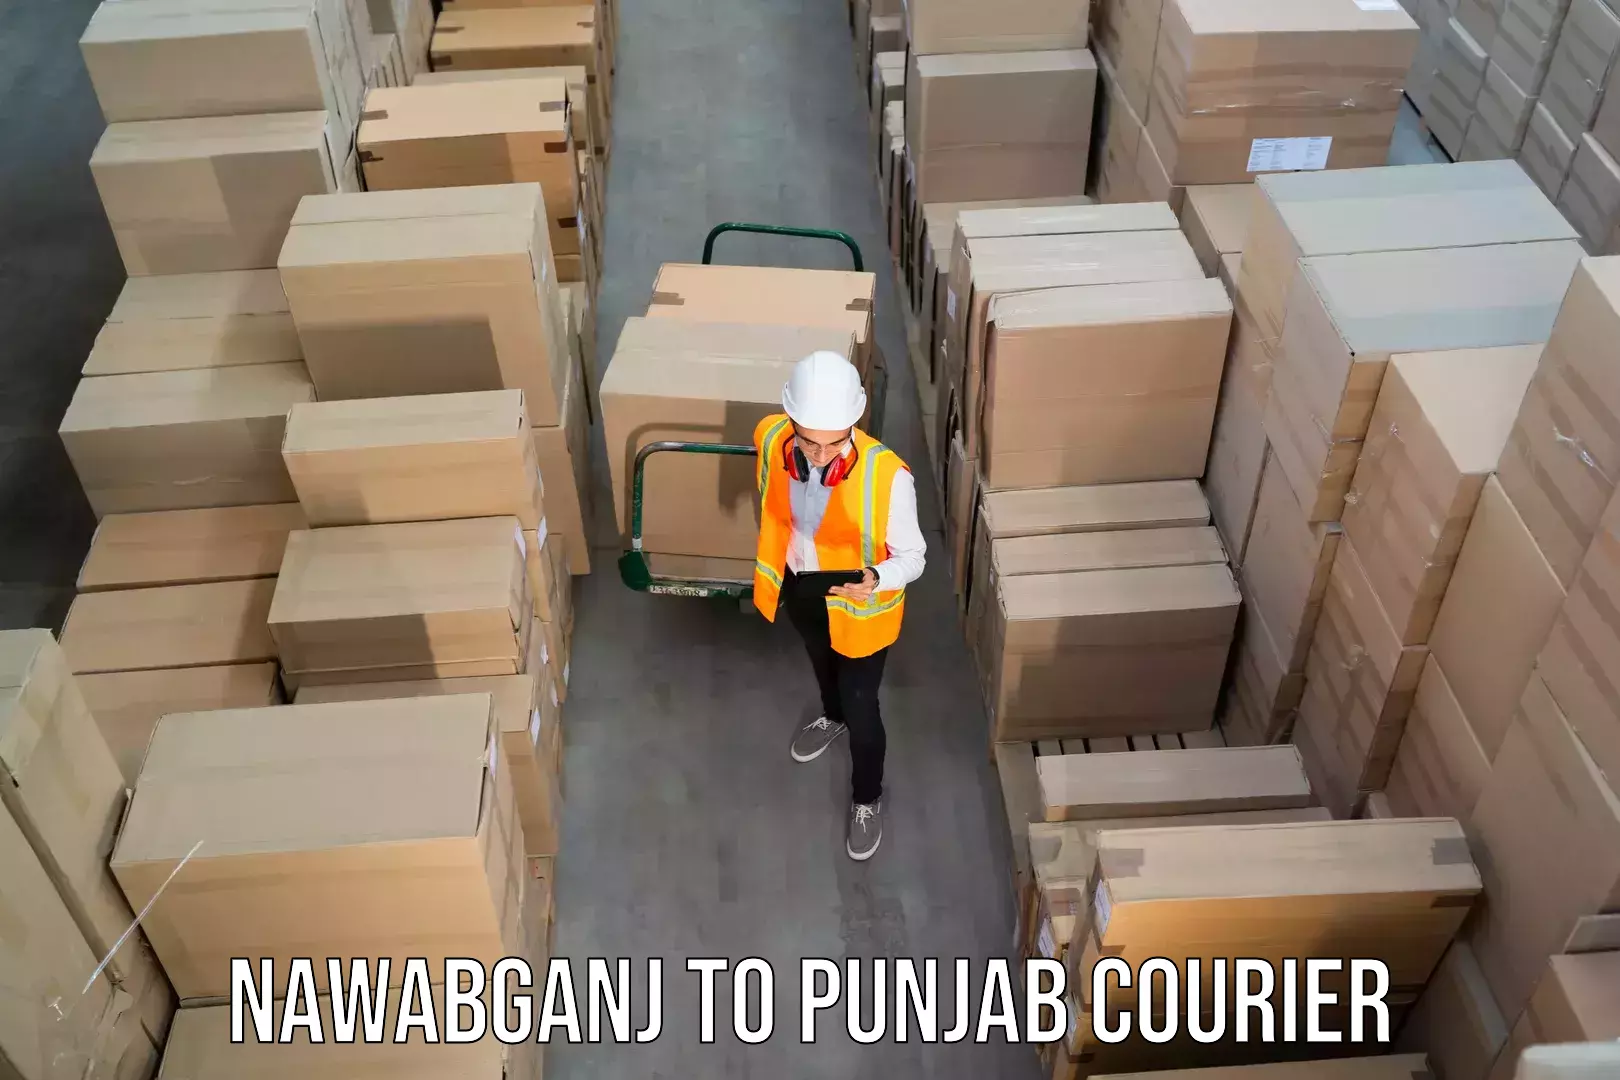 Residential courier service Nawabganj to Pathankot